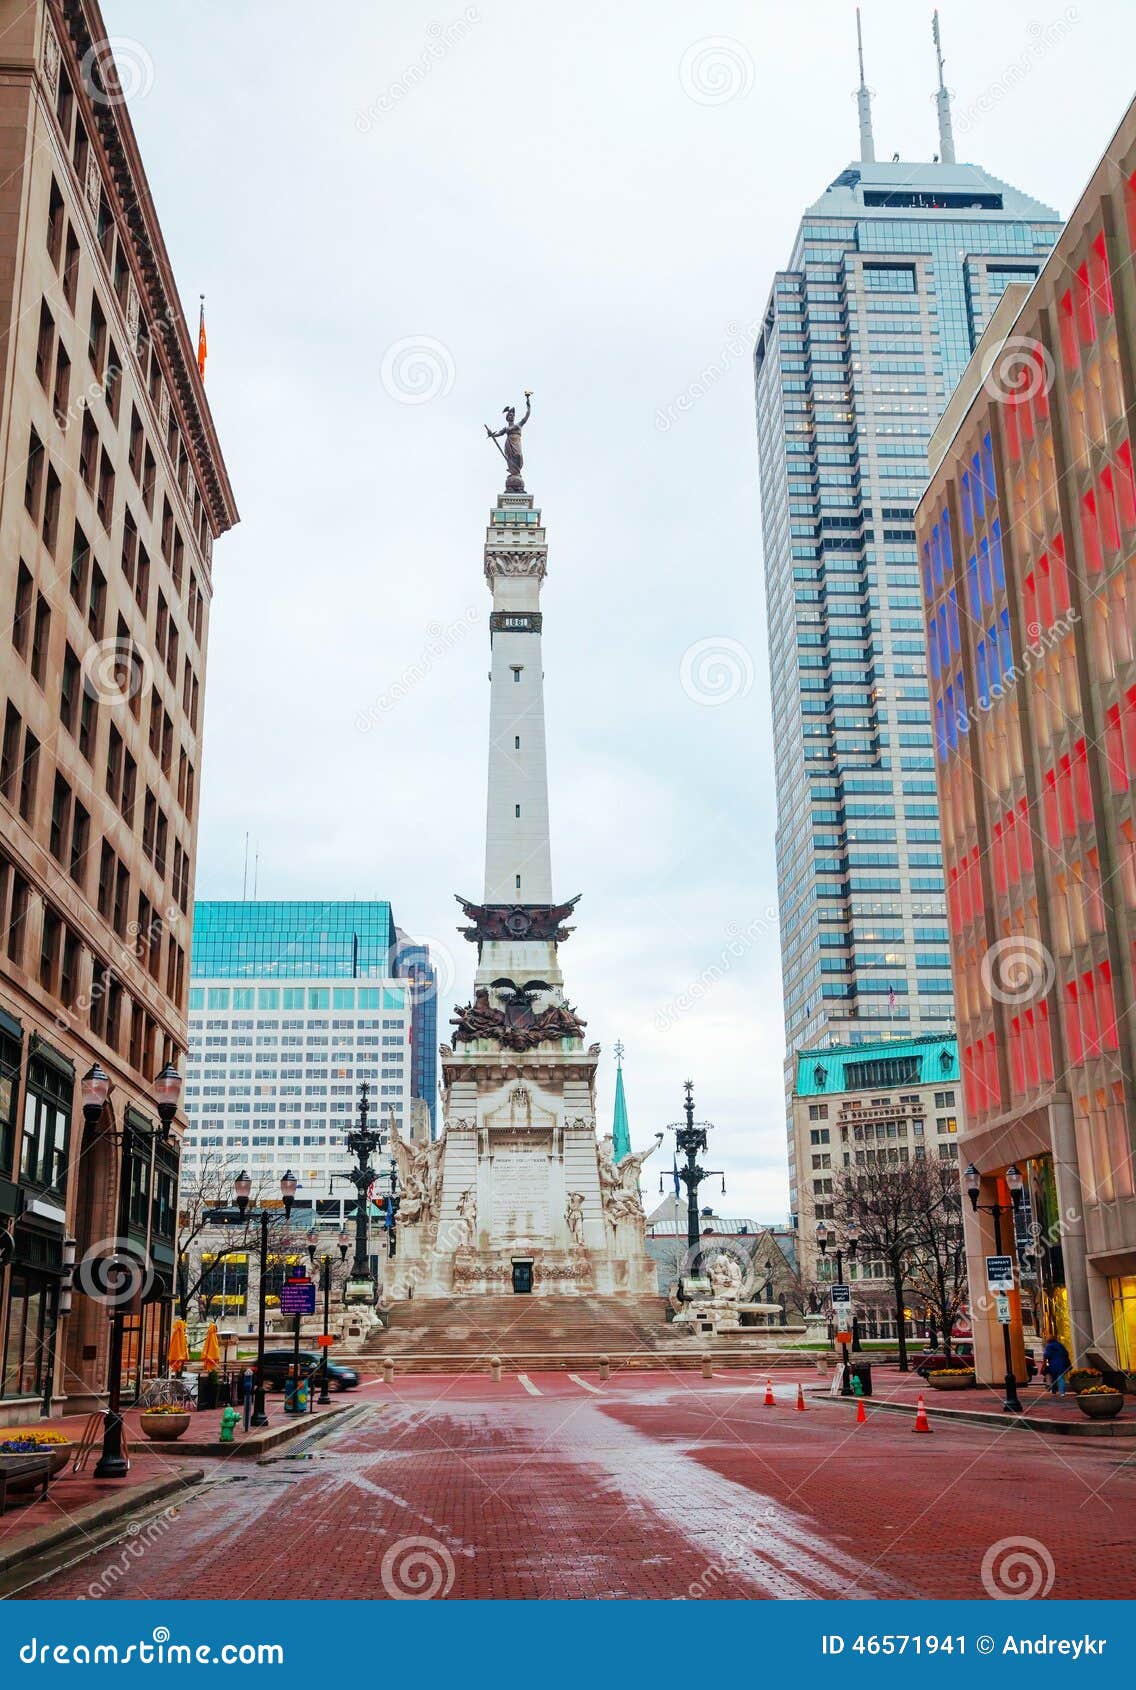 the state soldiers and sailors monument